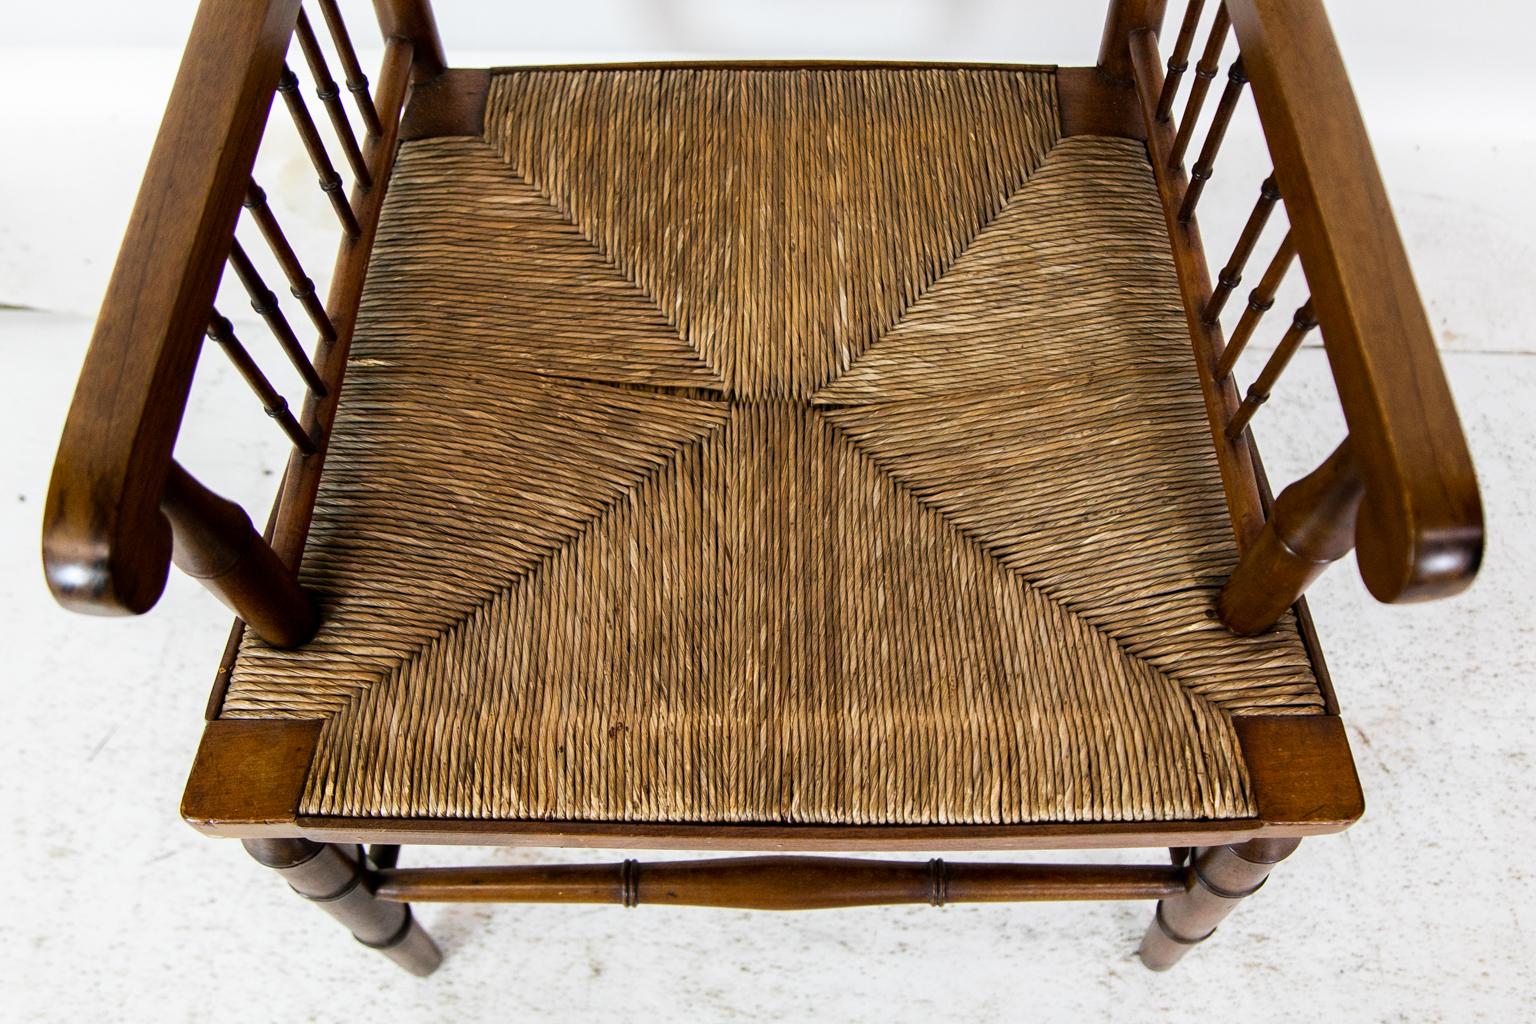 This arm chair has faux bamboo horizontal spindles in the back and arms. It has the original rush set in excellent condition. The front legs and cross stretcher have faux bamboo turnings. There are double turn stretchers connecting the front and